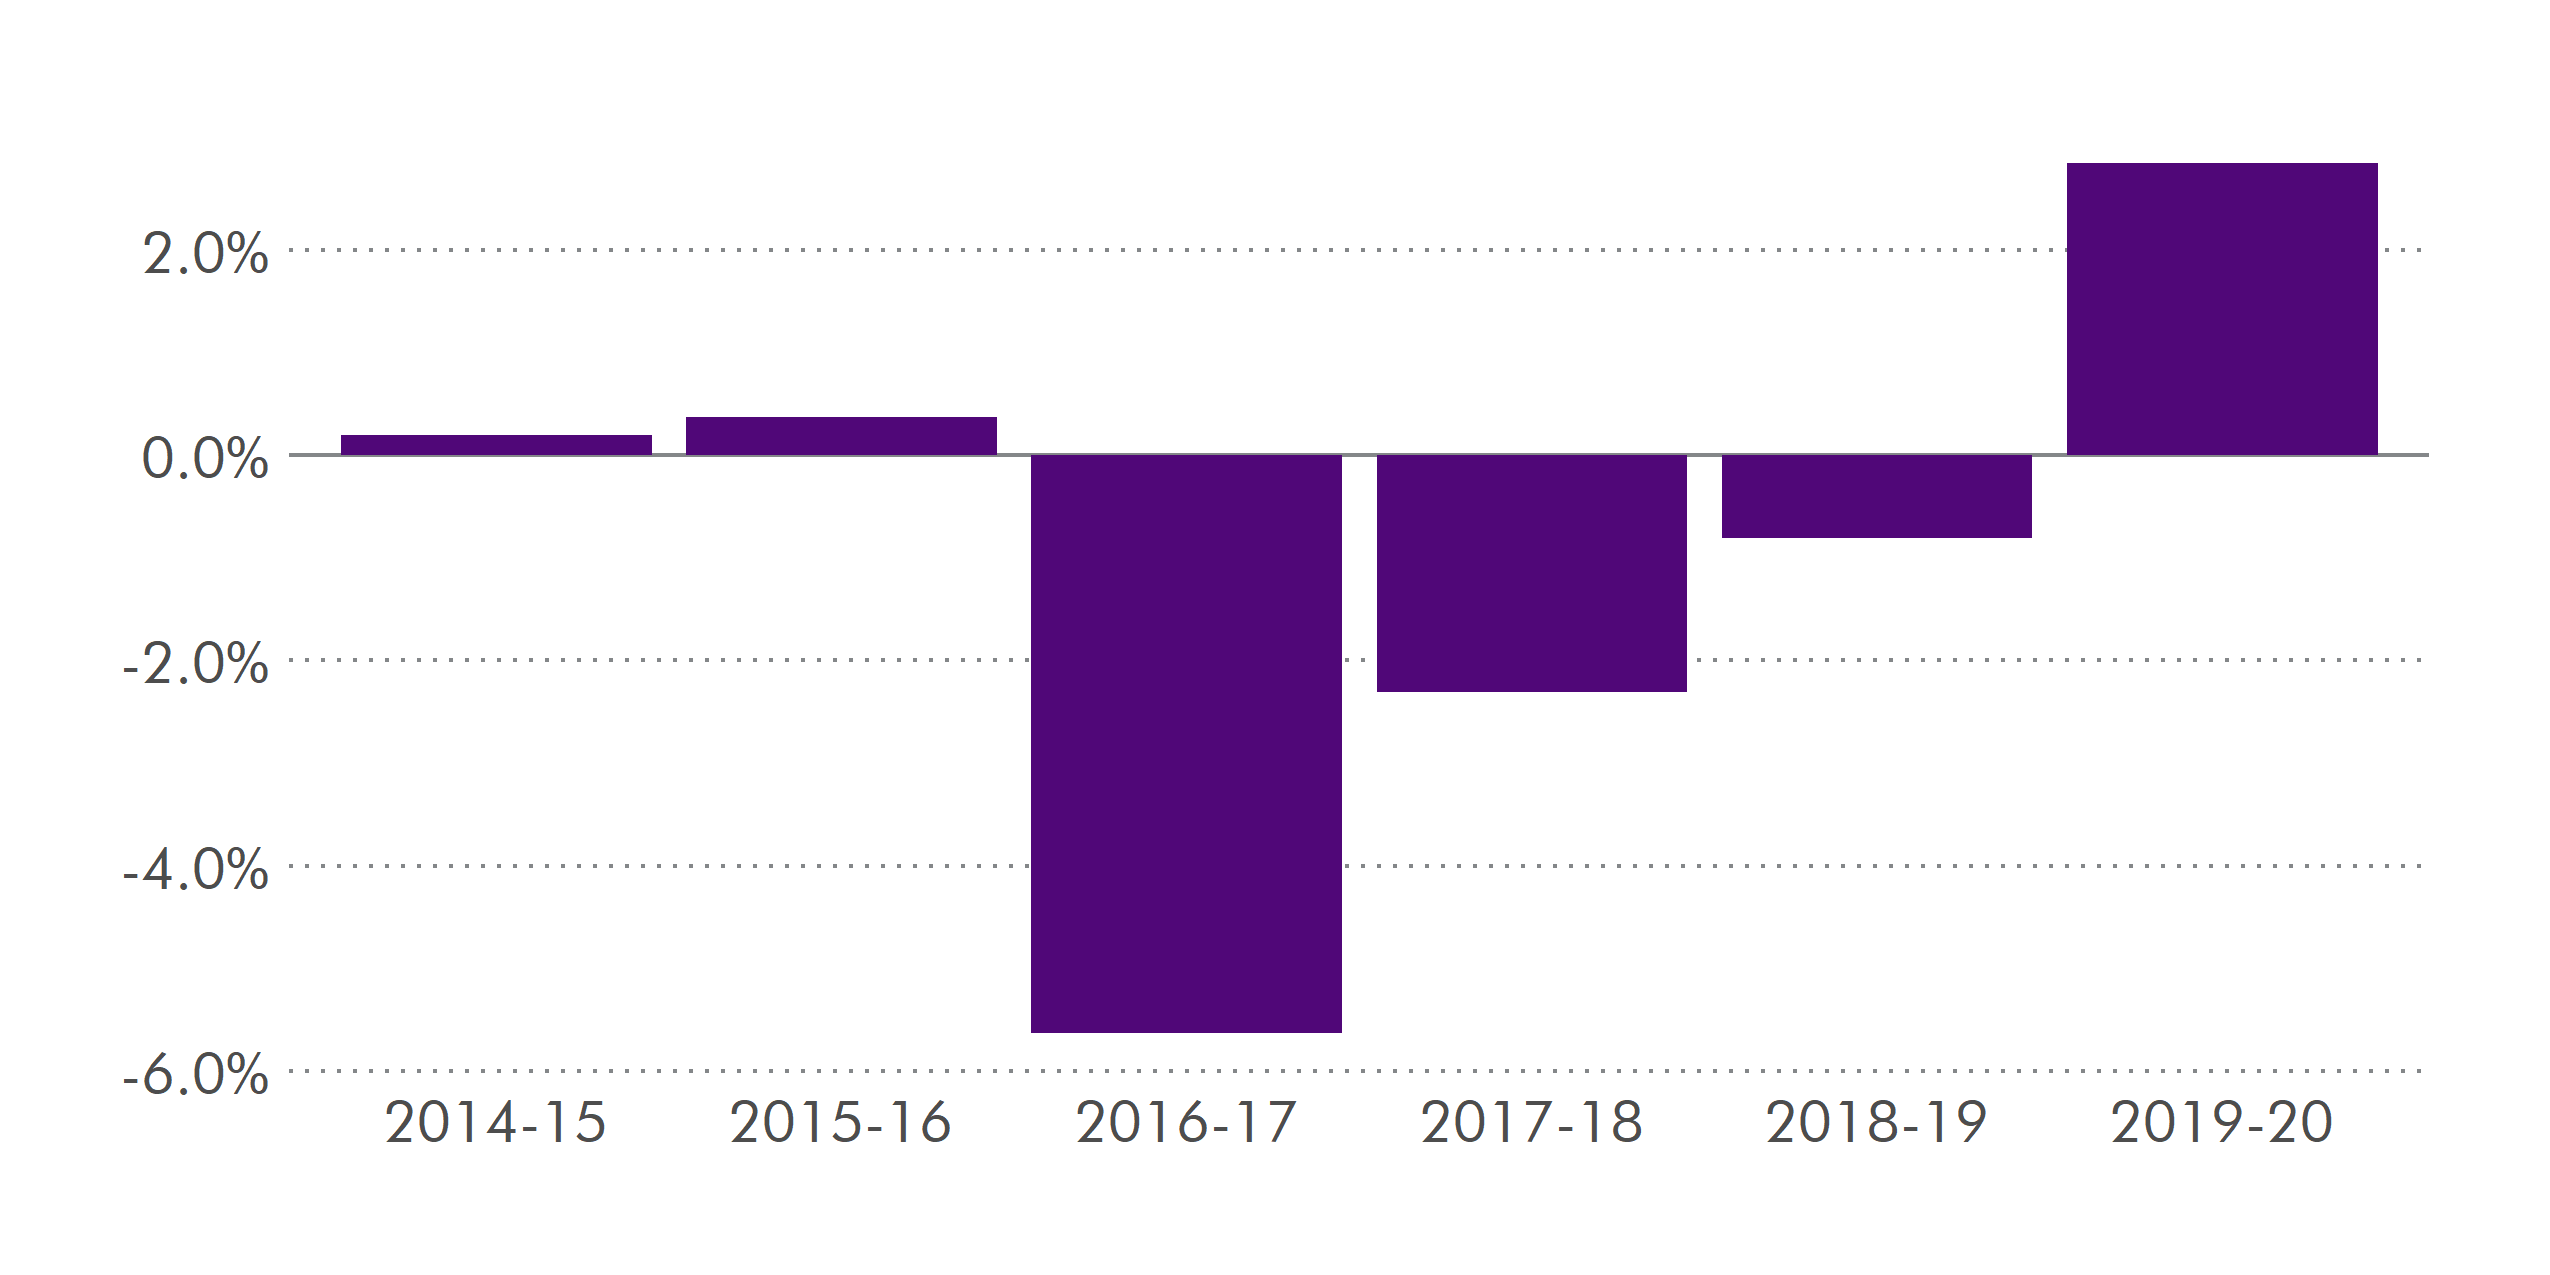 Showing slight real term increases in 2014-15 and 2015-16, followed by large reductions in 2016-17 and 2017-18. Real terms increase of over 2% in 2019-20.